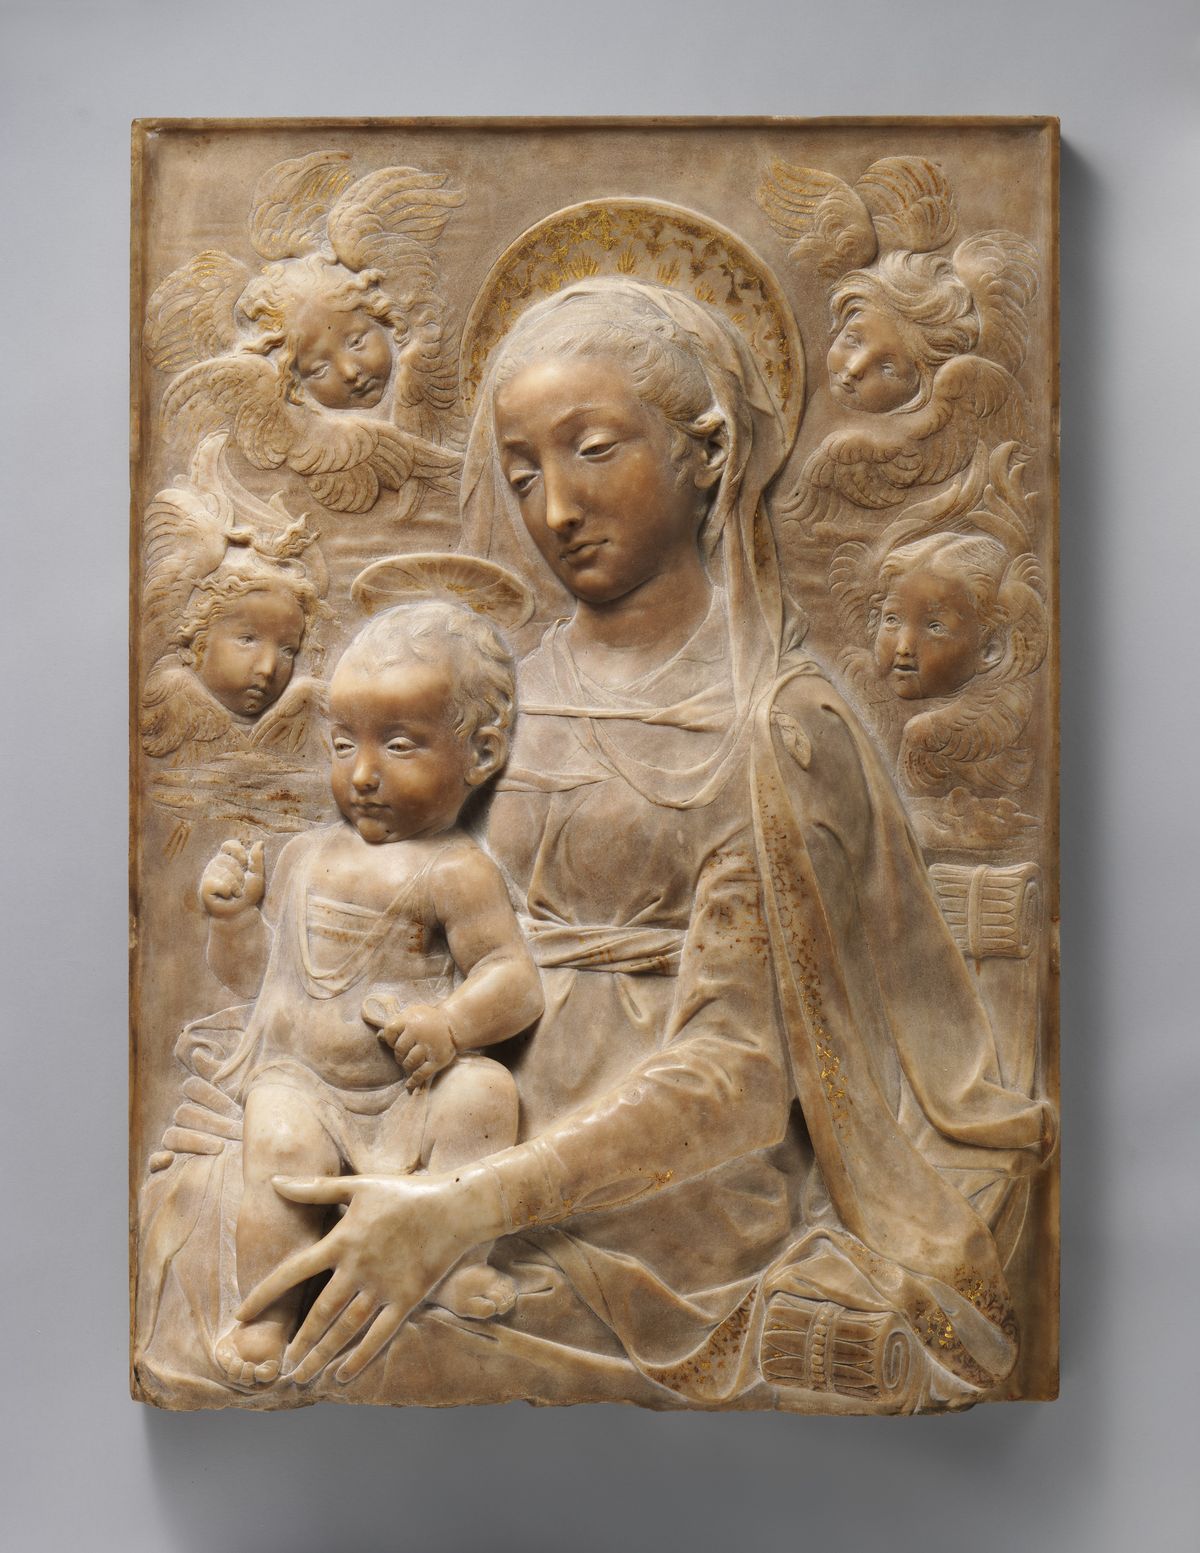 Madonna and Child with Angels Sculpture (1455–1460) by Antonio Rossellino - Catholic Stock Photo